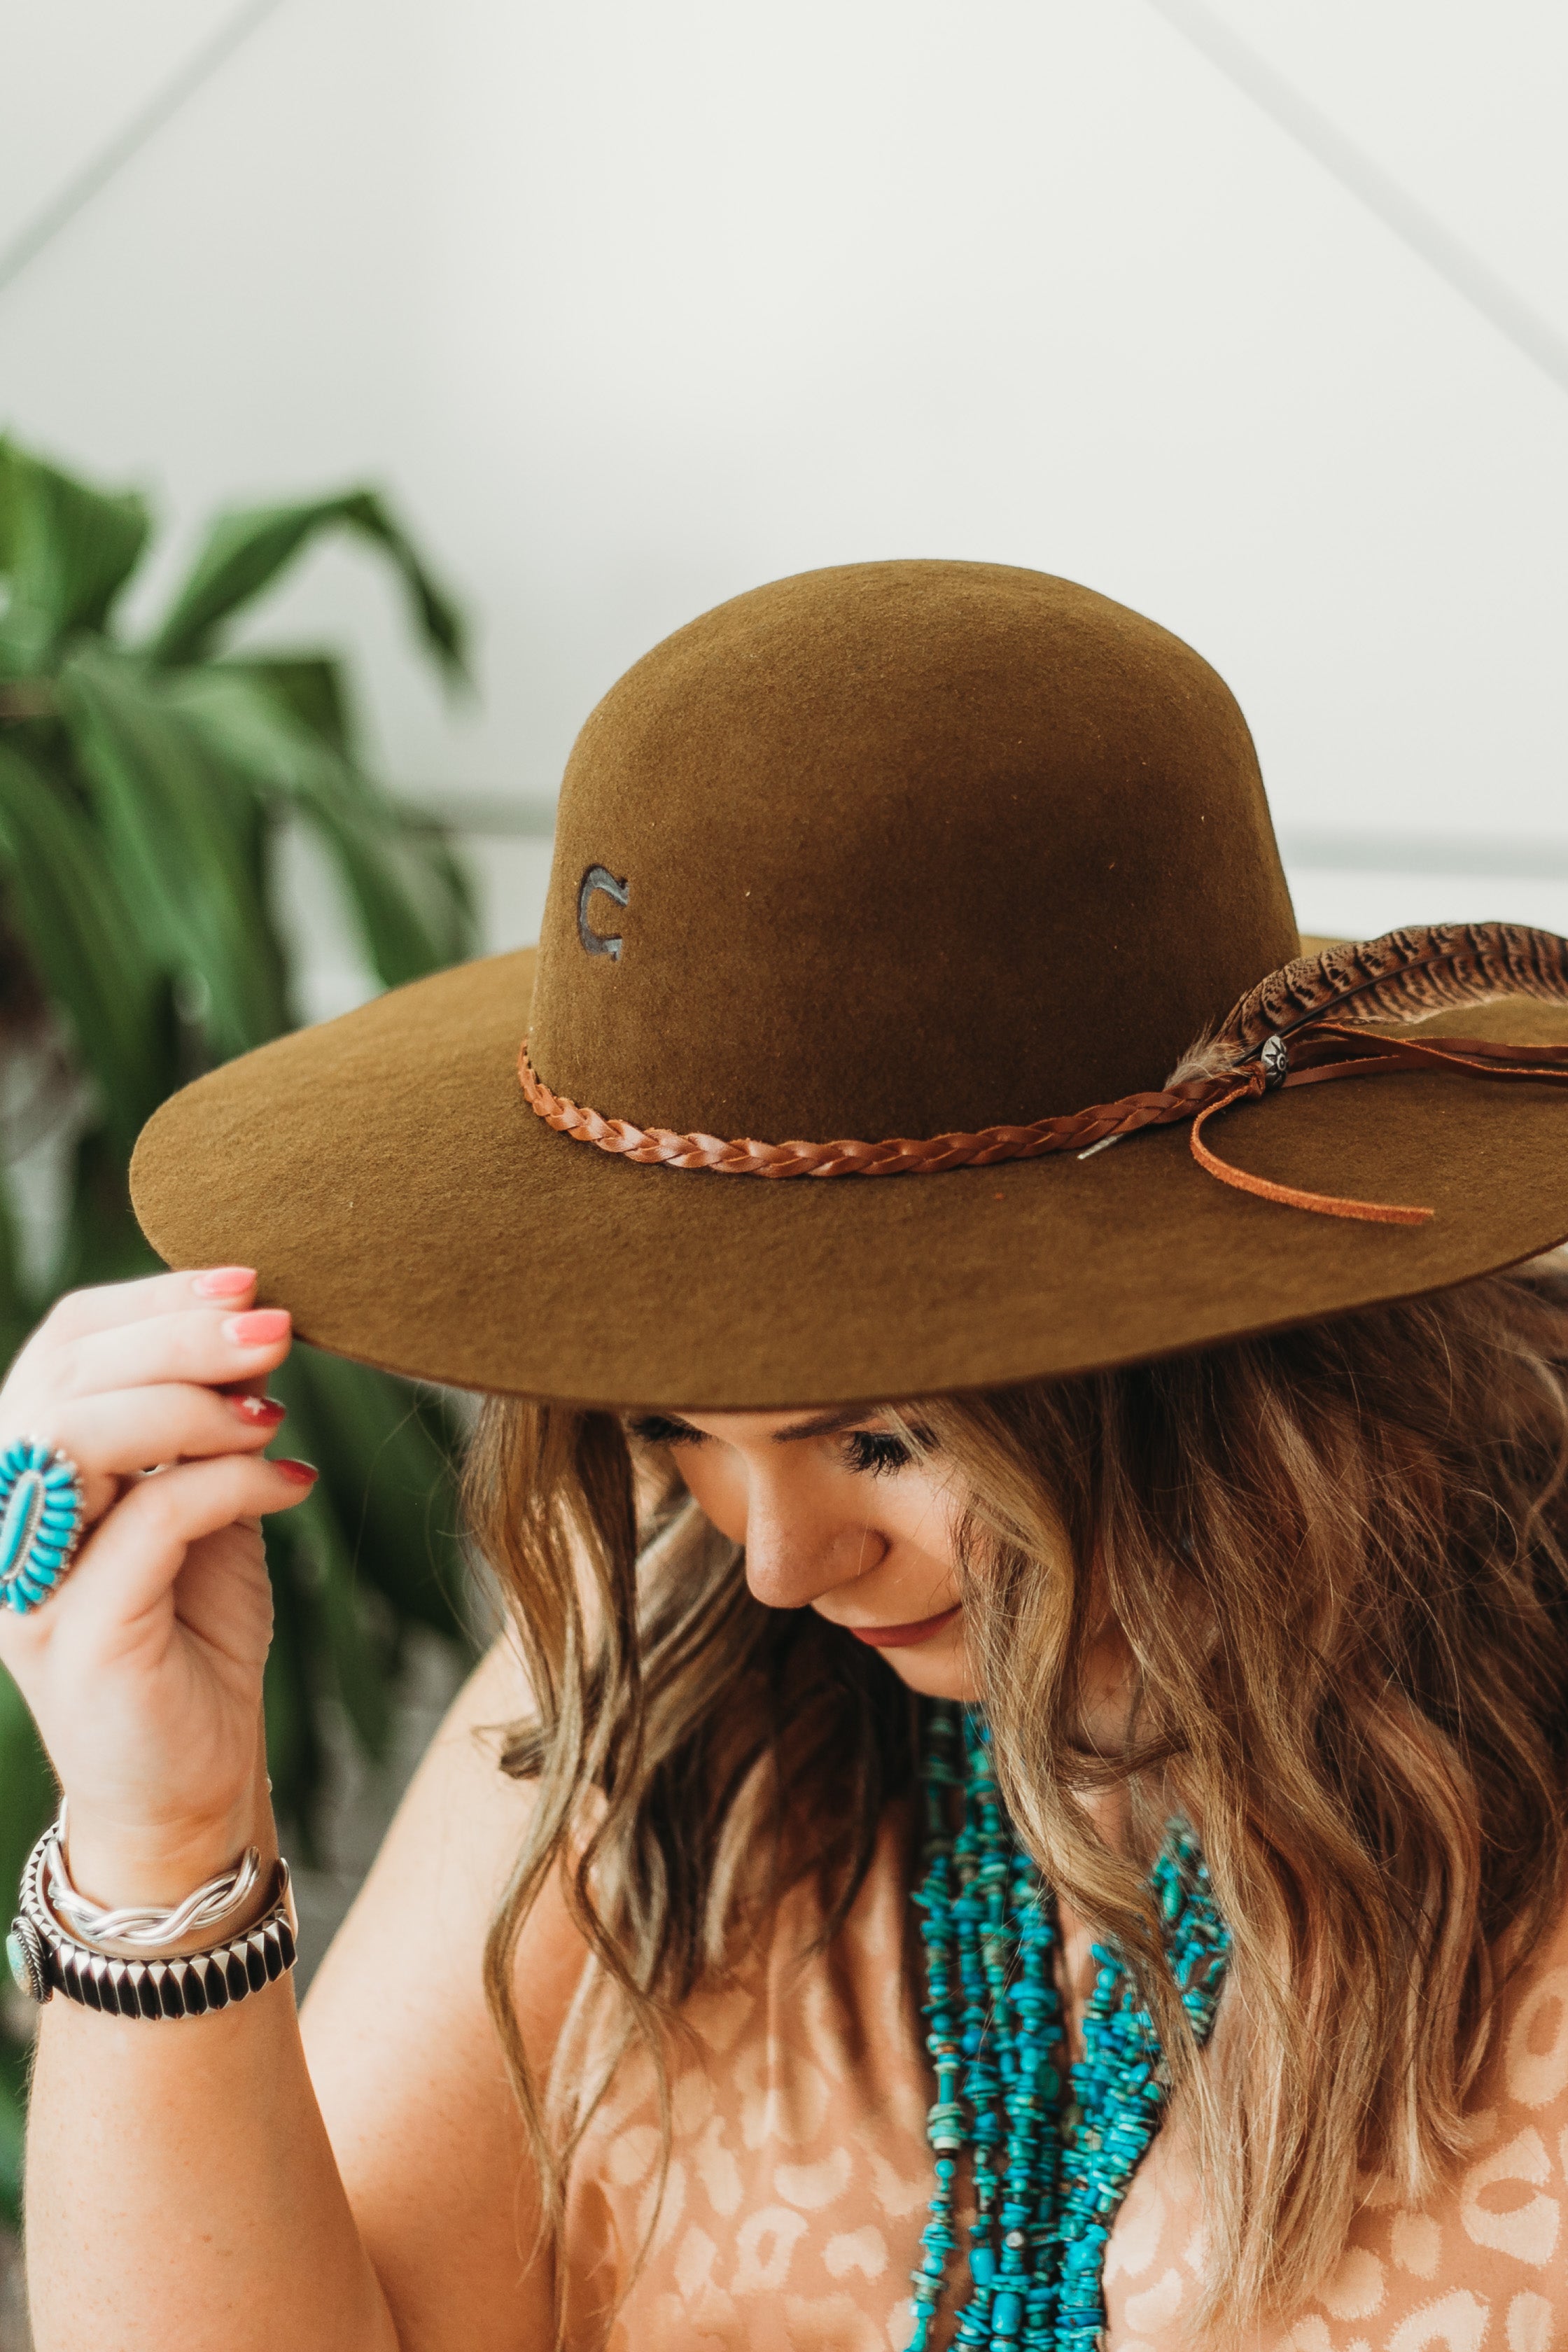 Charlie 1 Horse | Wanderlust Wool Felt Floppy Hat with Braided Band in Acorn - Giddy Up Glamour Boutique